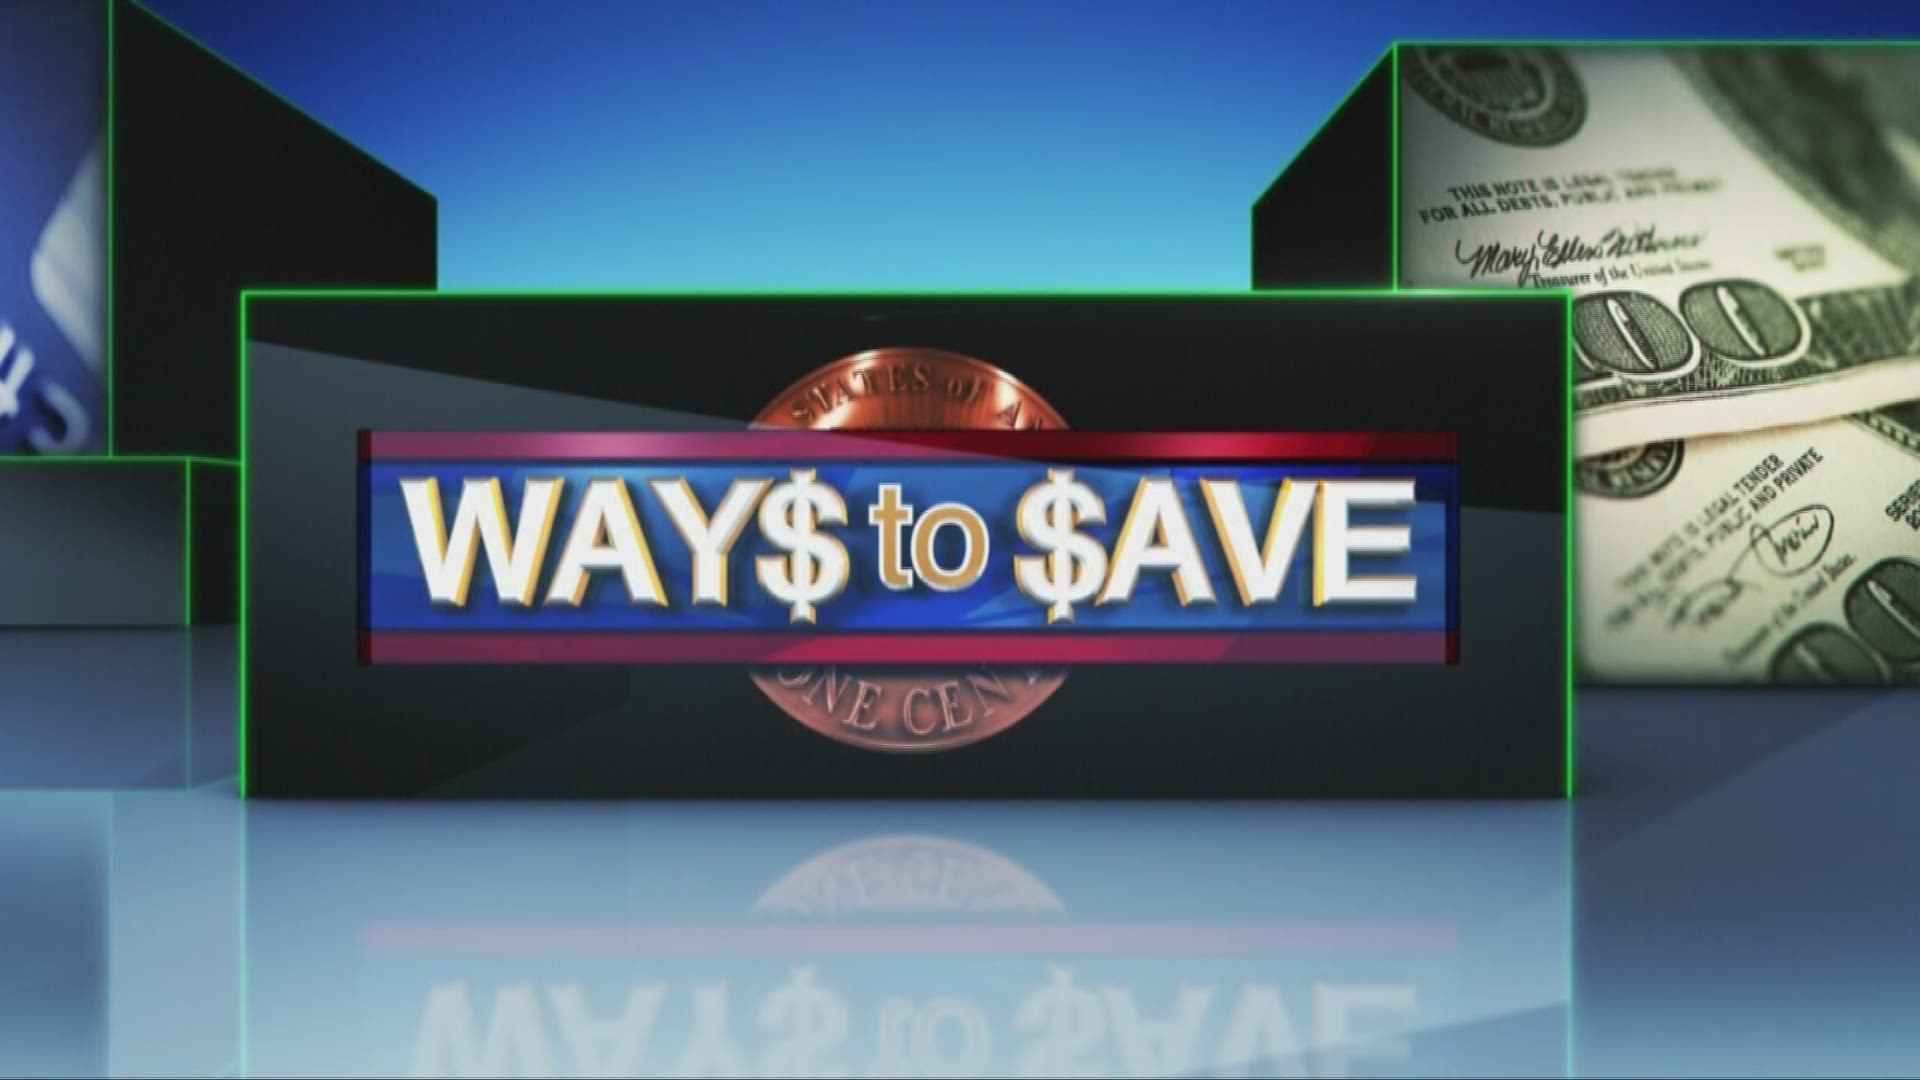 Ways To Save for Friday, August 11, 2017